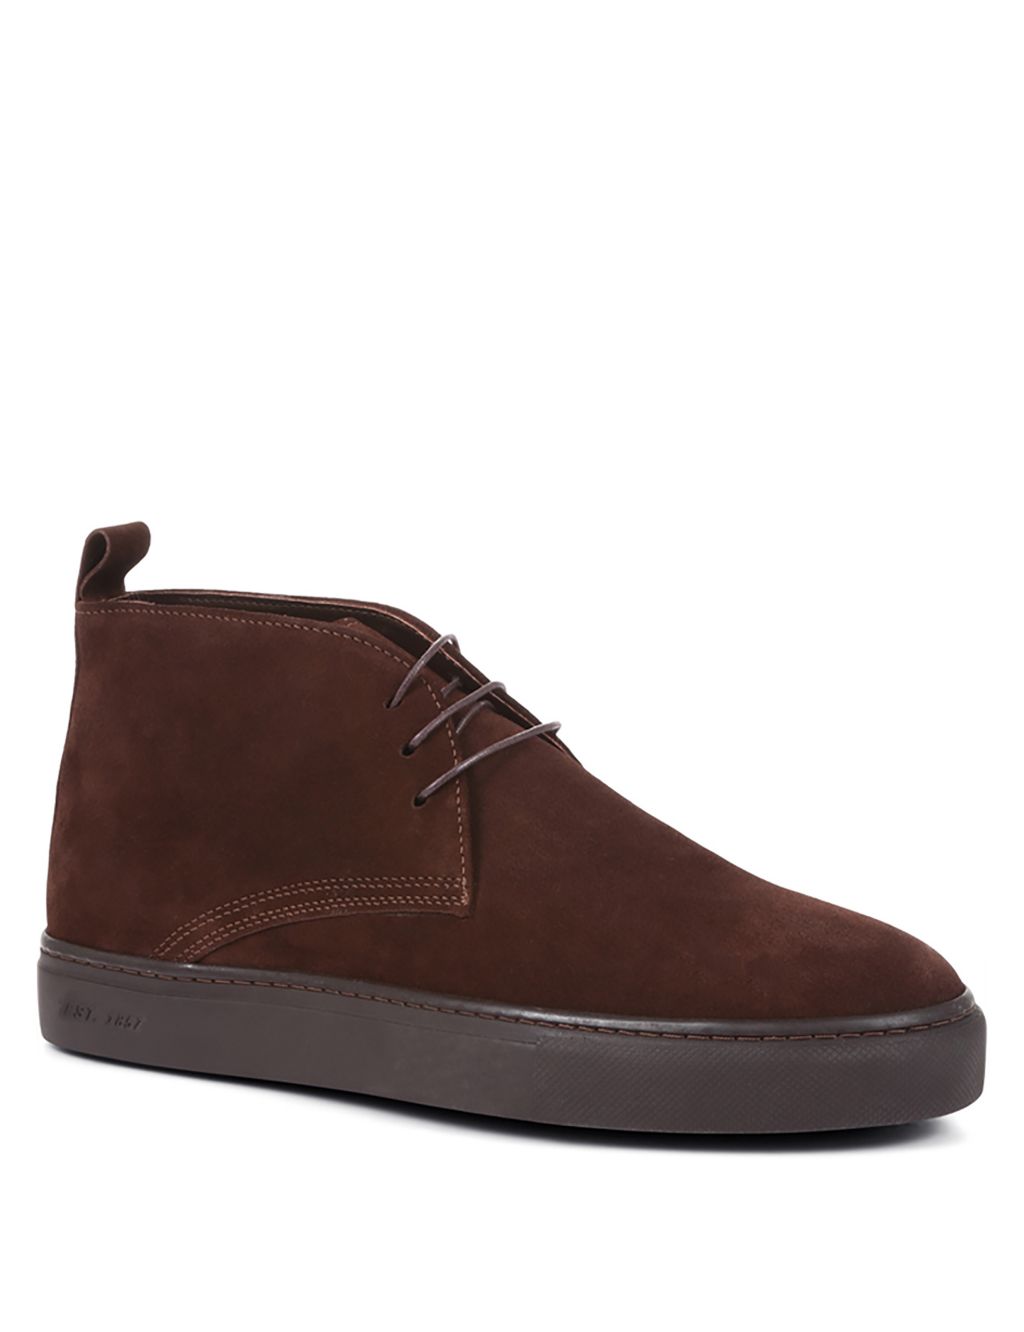 Suede Chukka Boots image 3